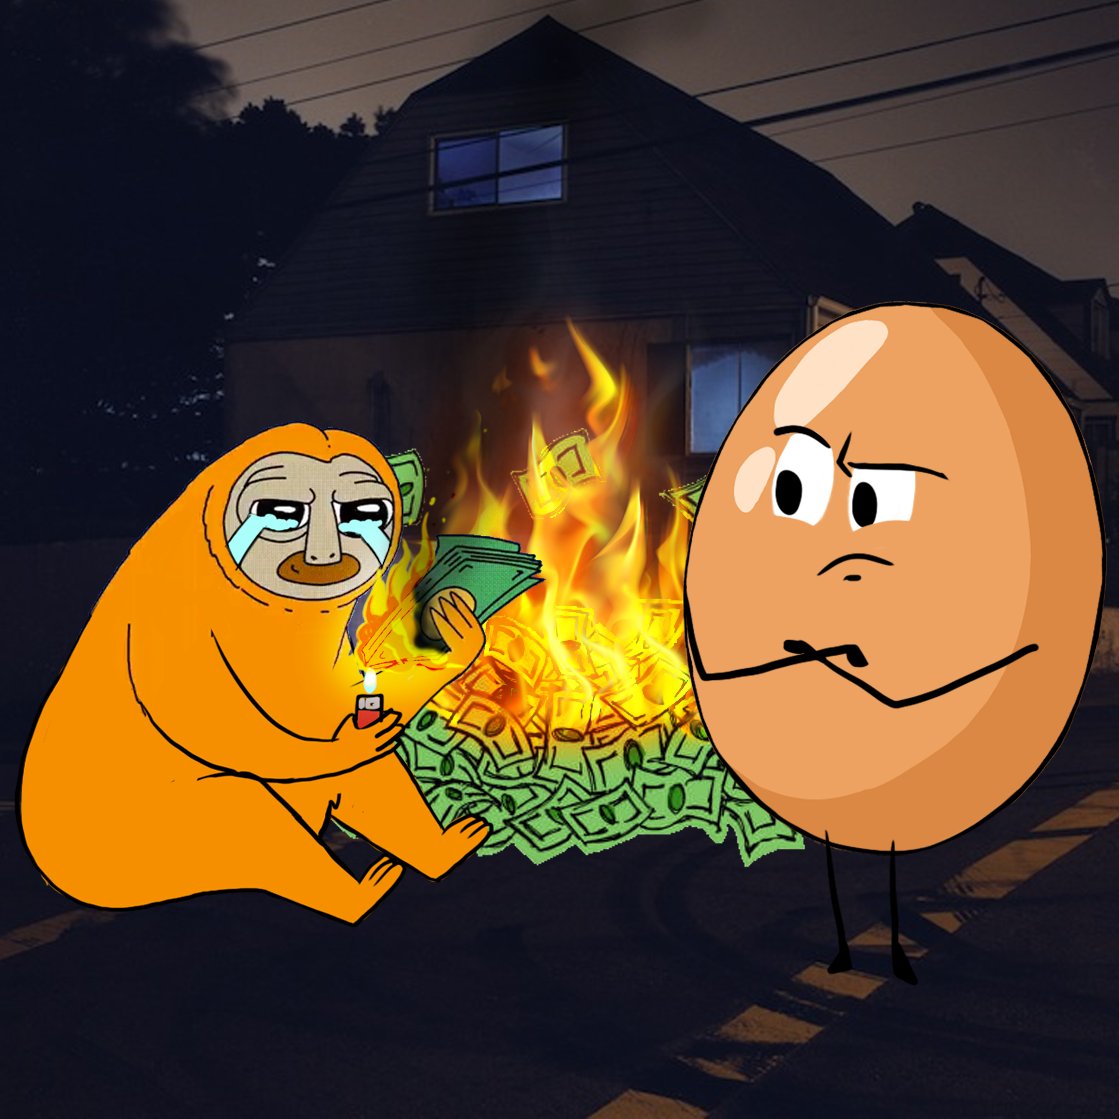 If you got slerfed 🦥: Drop your wallet 🥚 RT & LIKE 🐣